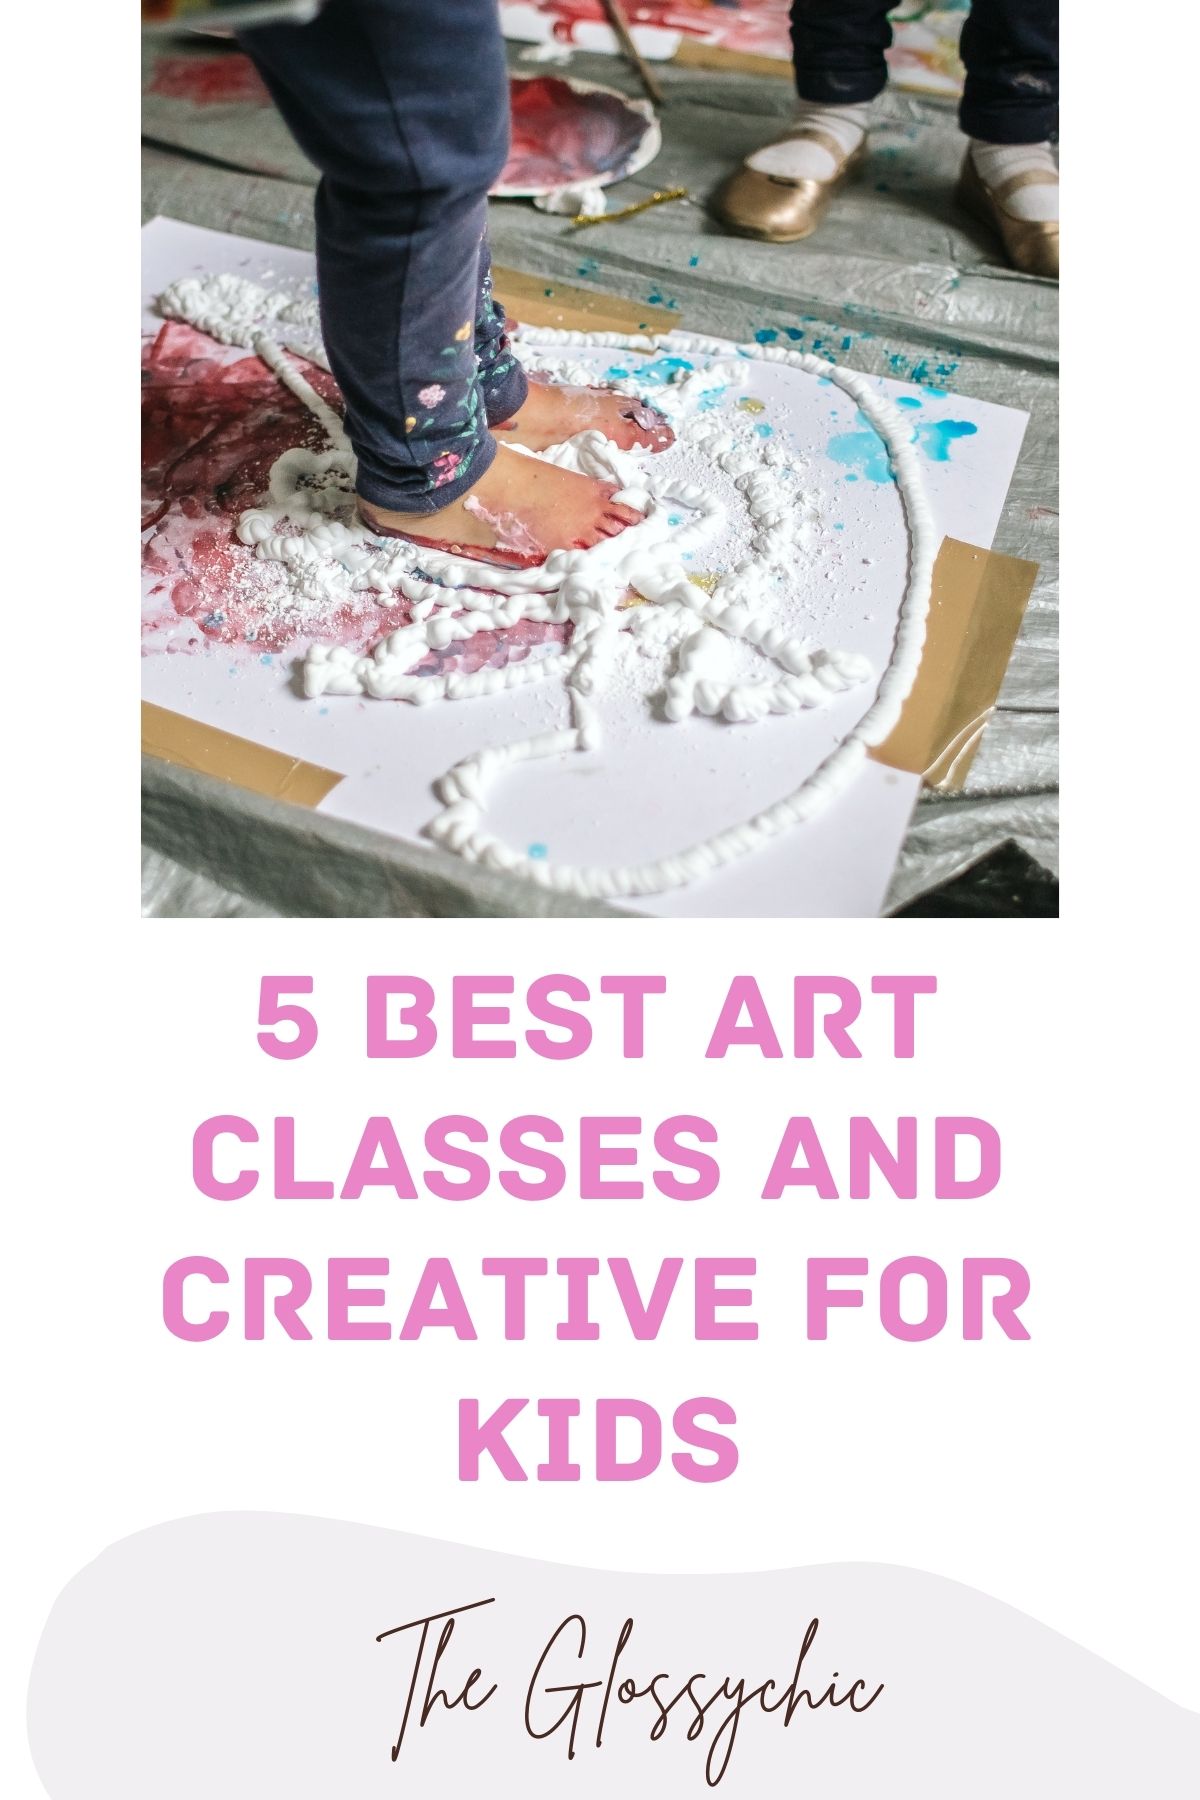 5 Best Art Classes And Creative For Kids